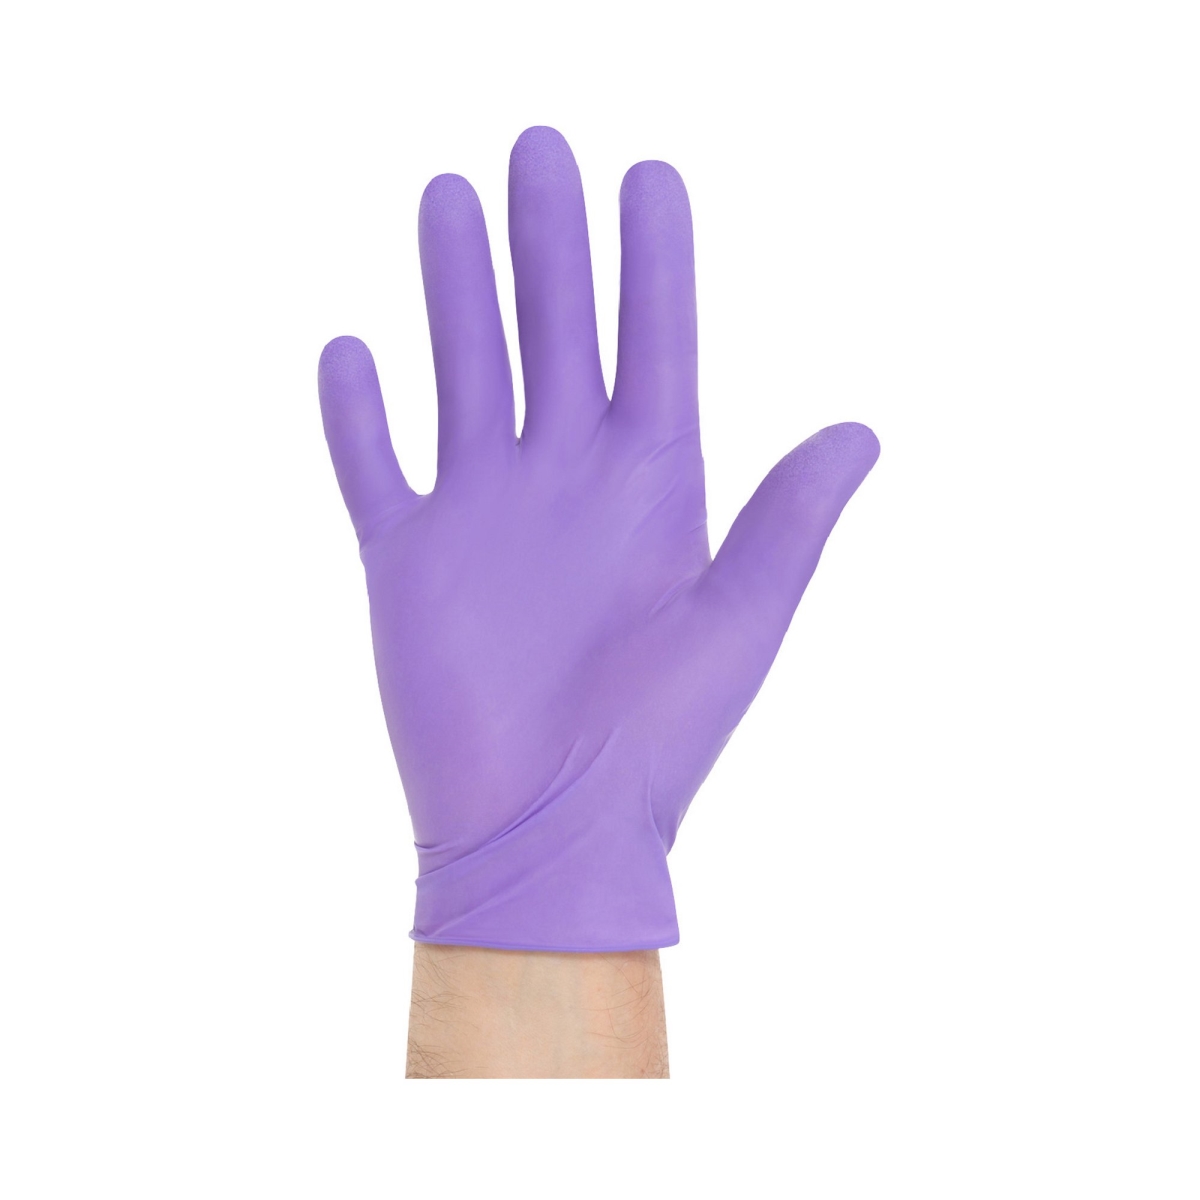 365068-BX Purple Nitrile-Xtra Nitrile Extended Cuff Length Exam Glove - Extra Large - 50 per Box - 10 Box per Case -  O&M Halyard, 365068_BX